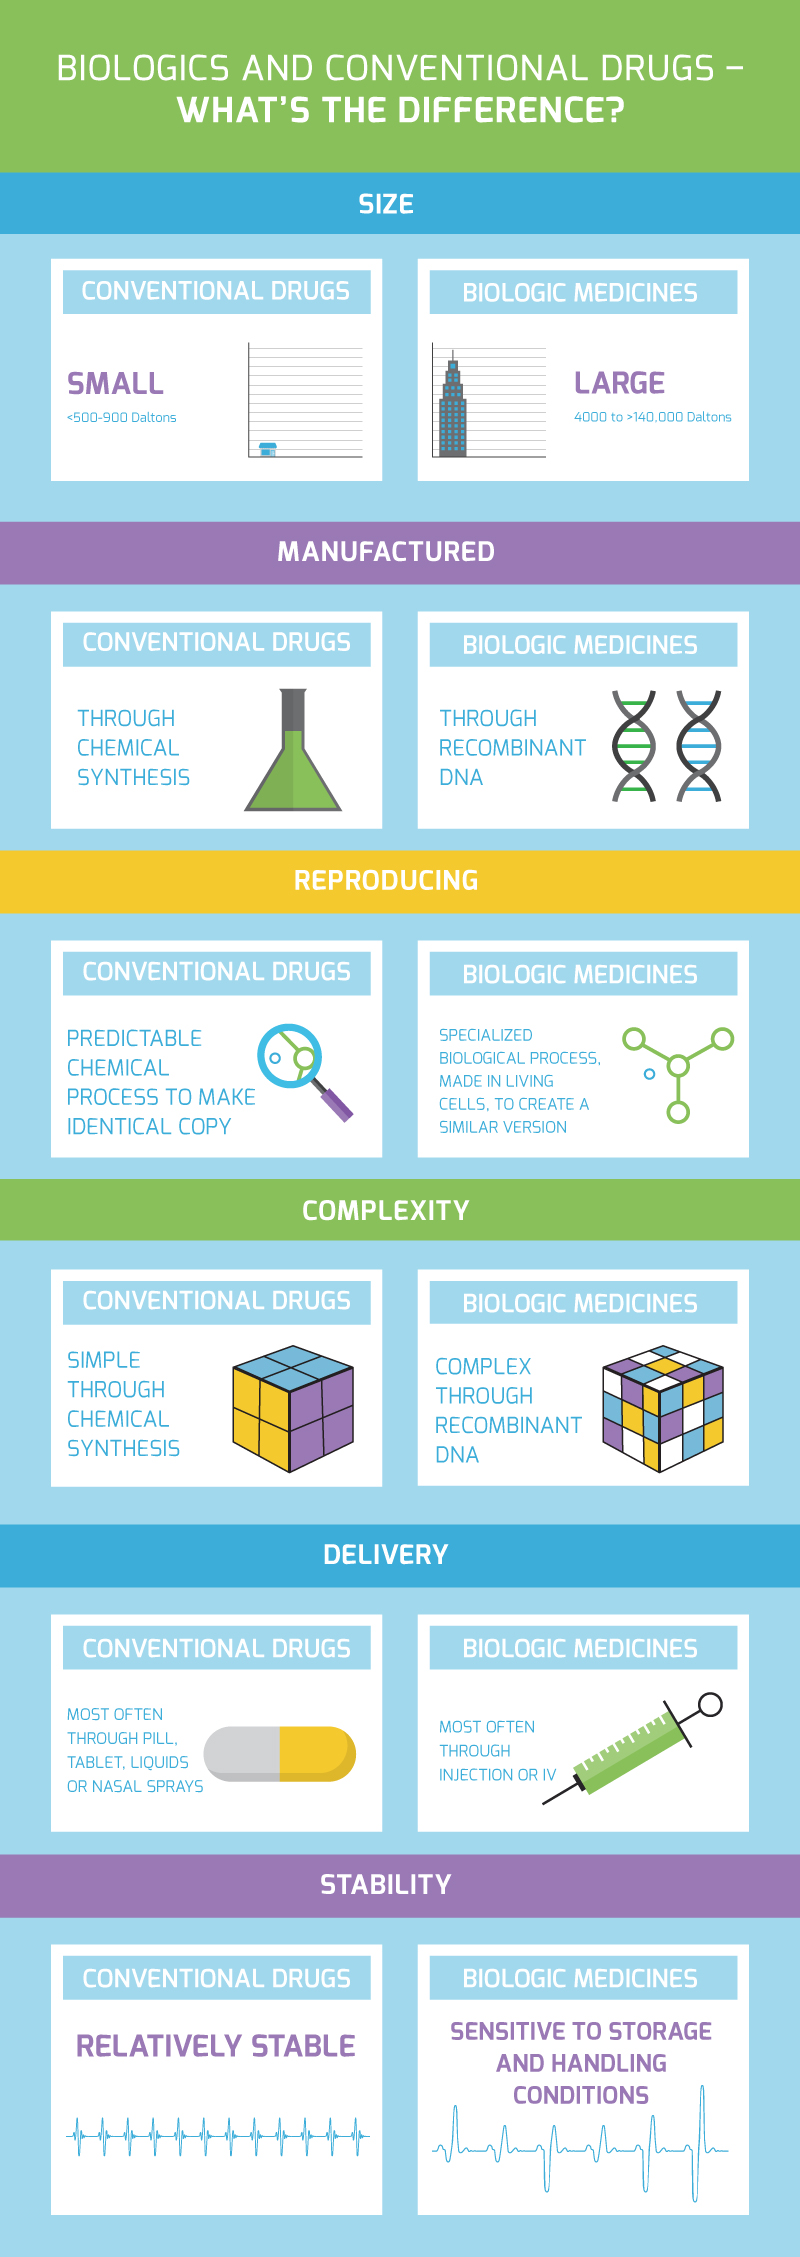 This infographic shows the difference between biologics and small-molecule, conventional drugs